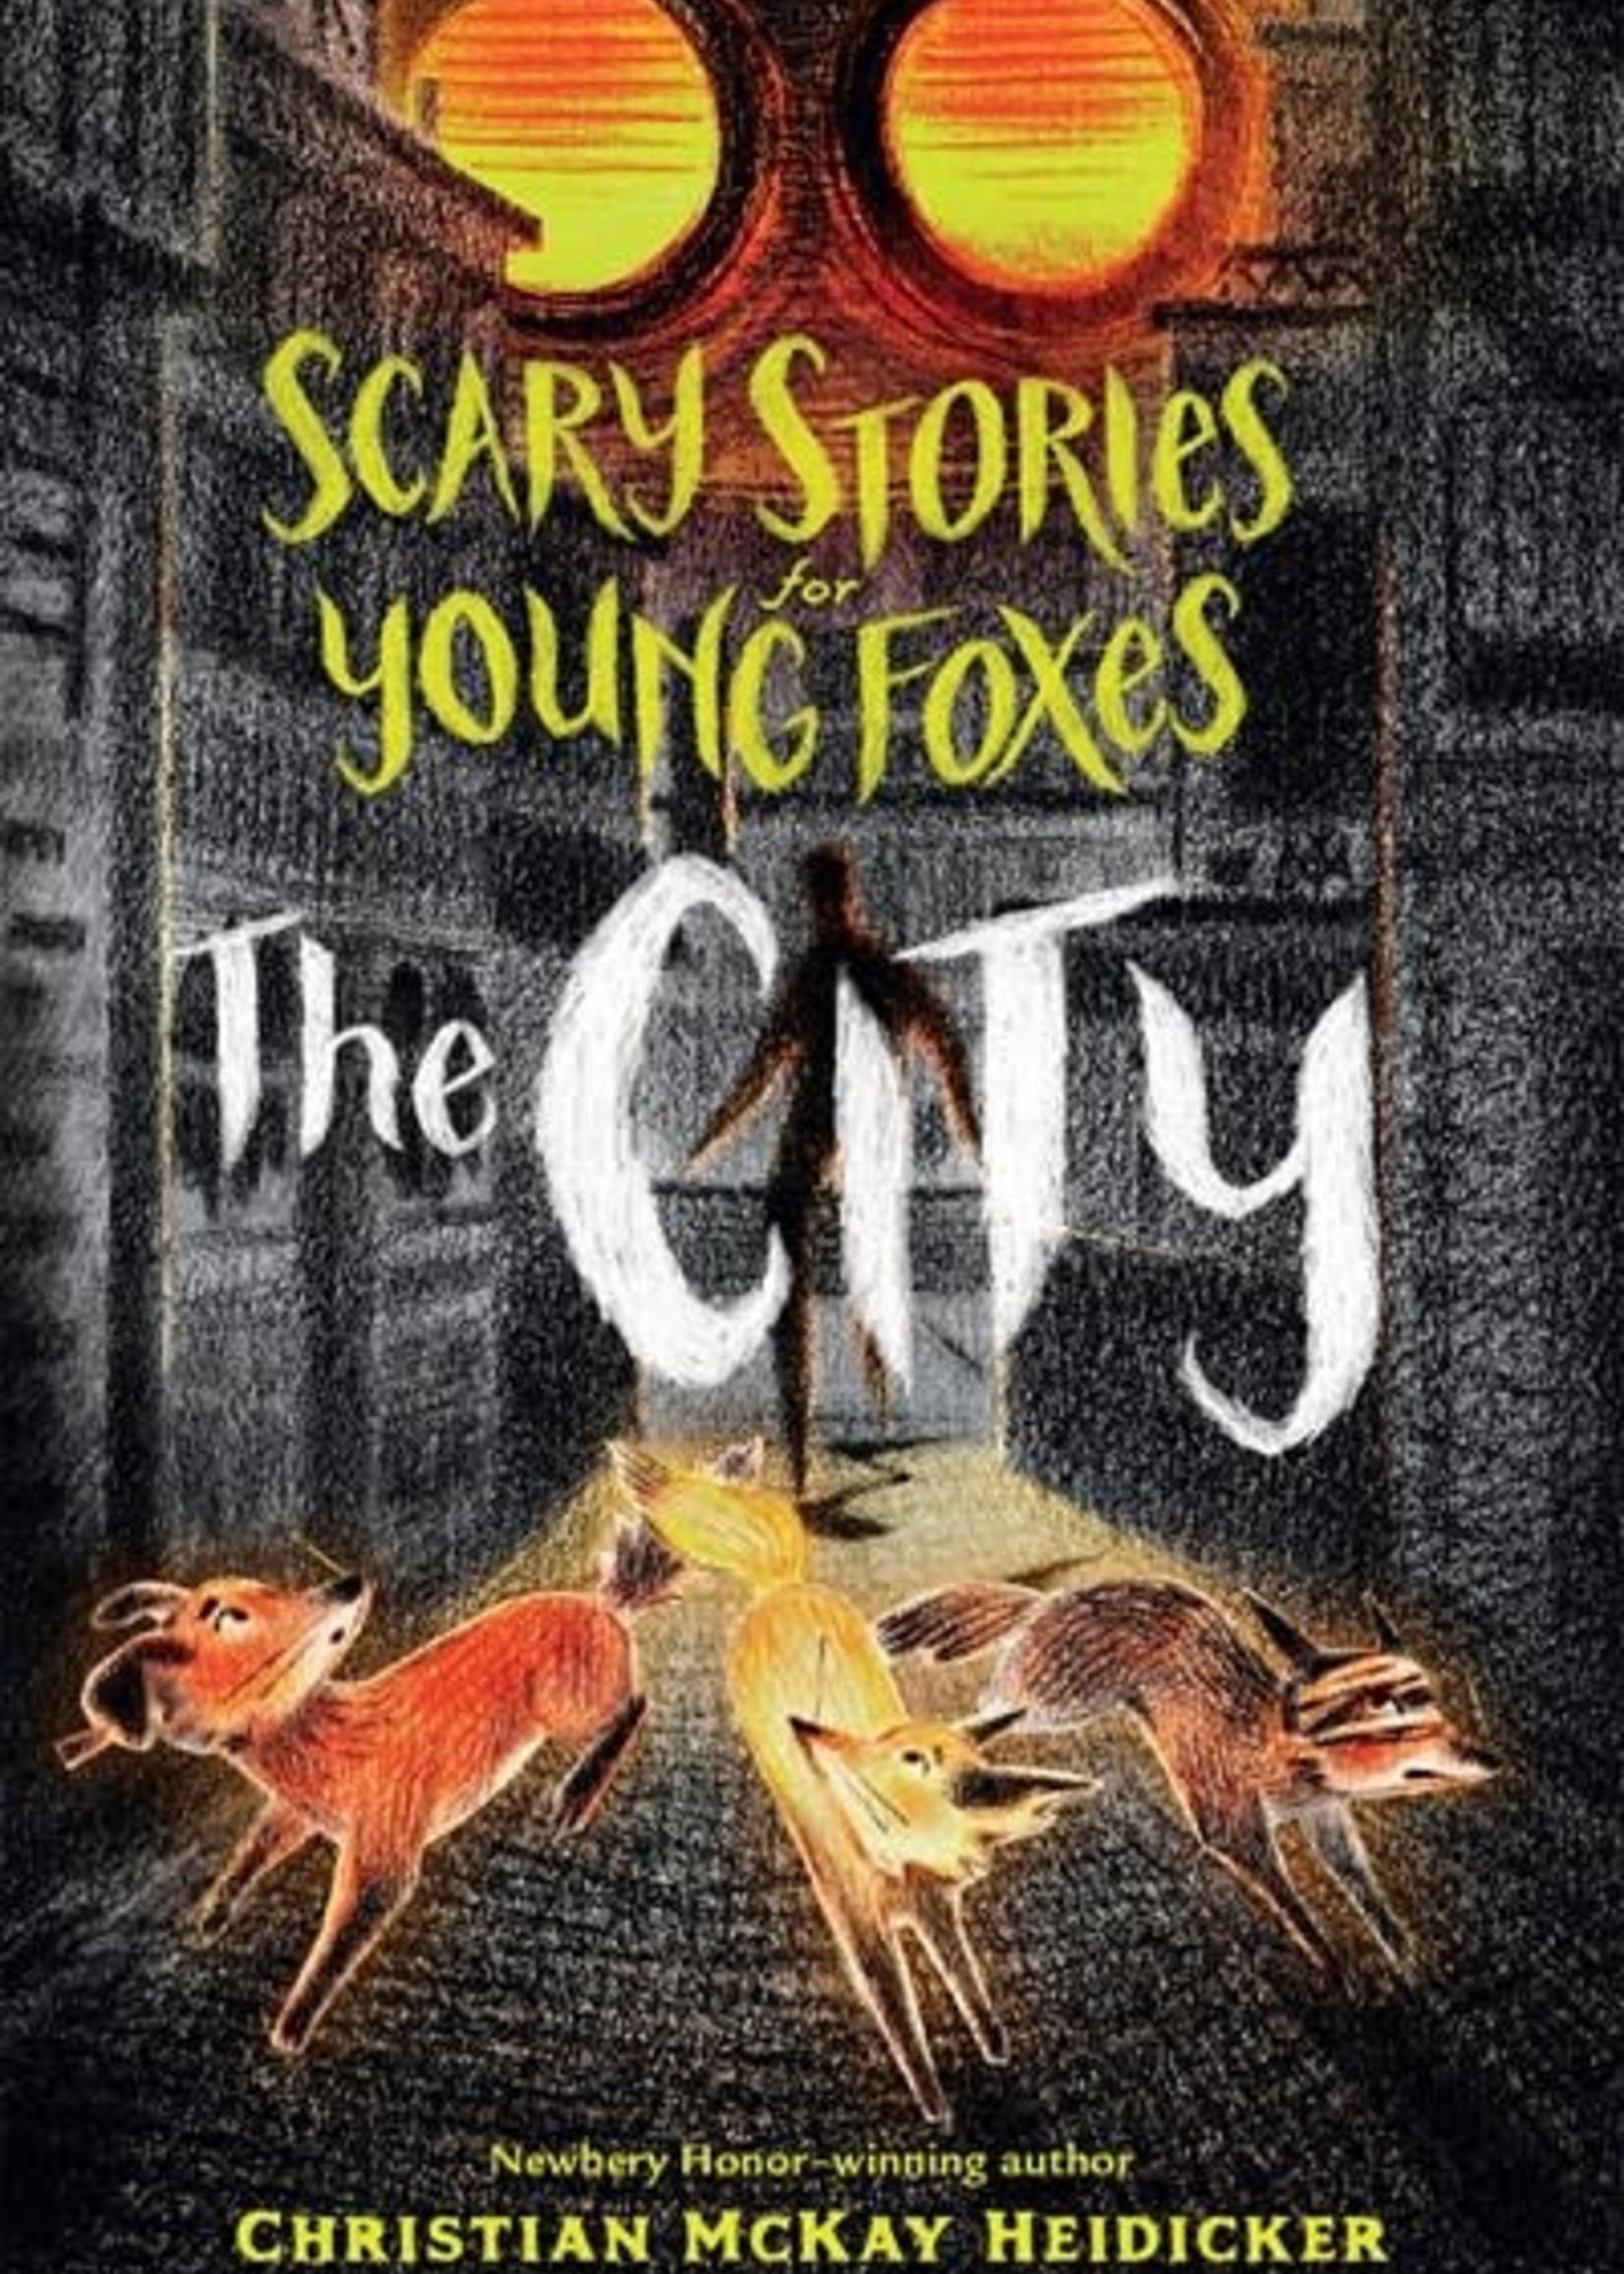 Scary Stories for Young Foxes 2 City